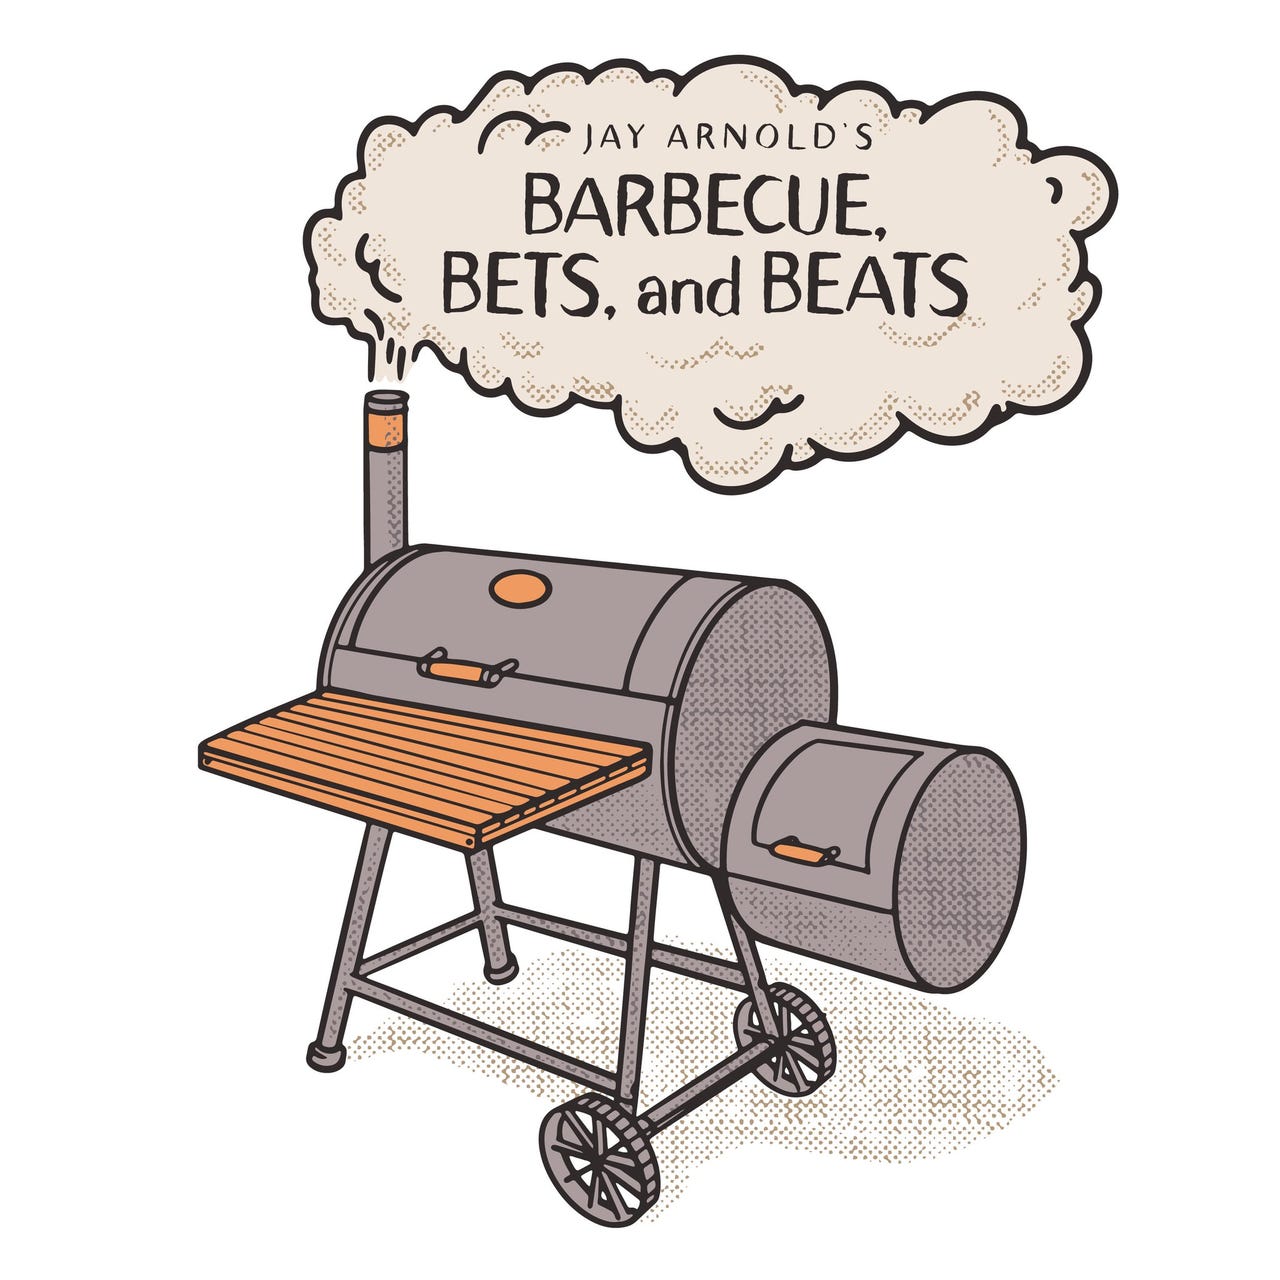 Artwork for Barbecue, Bets, and Beats